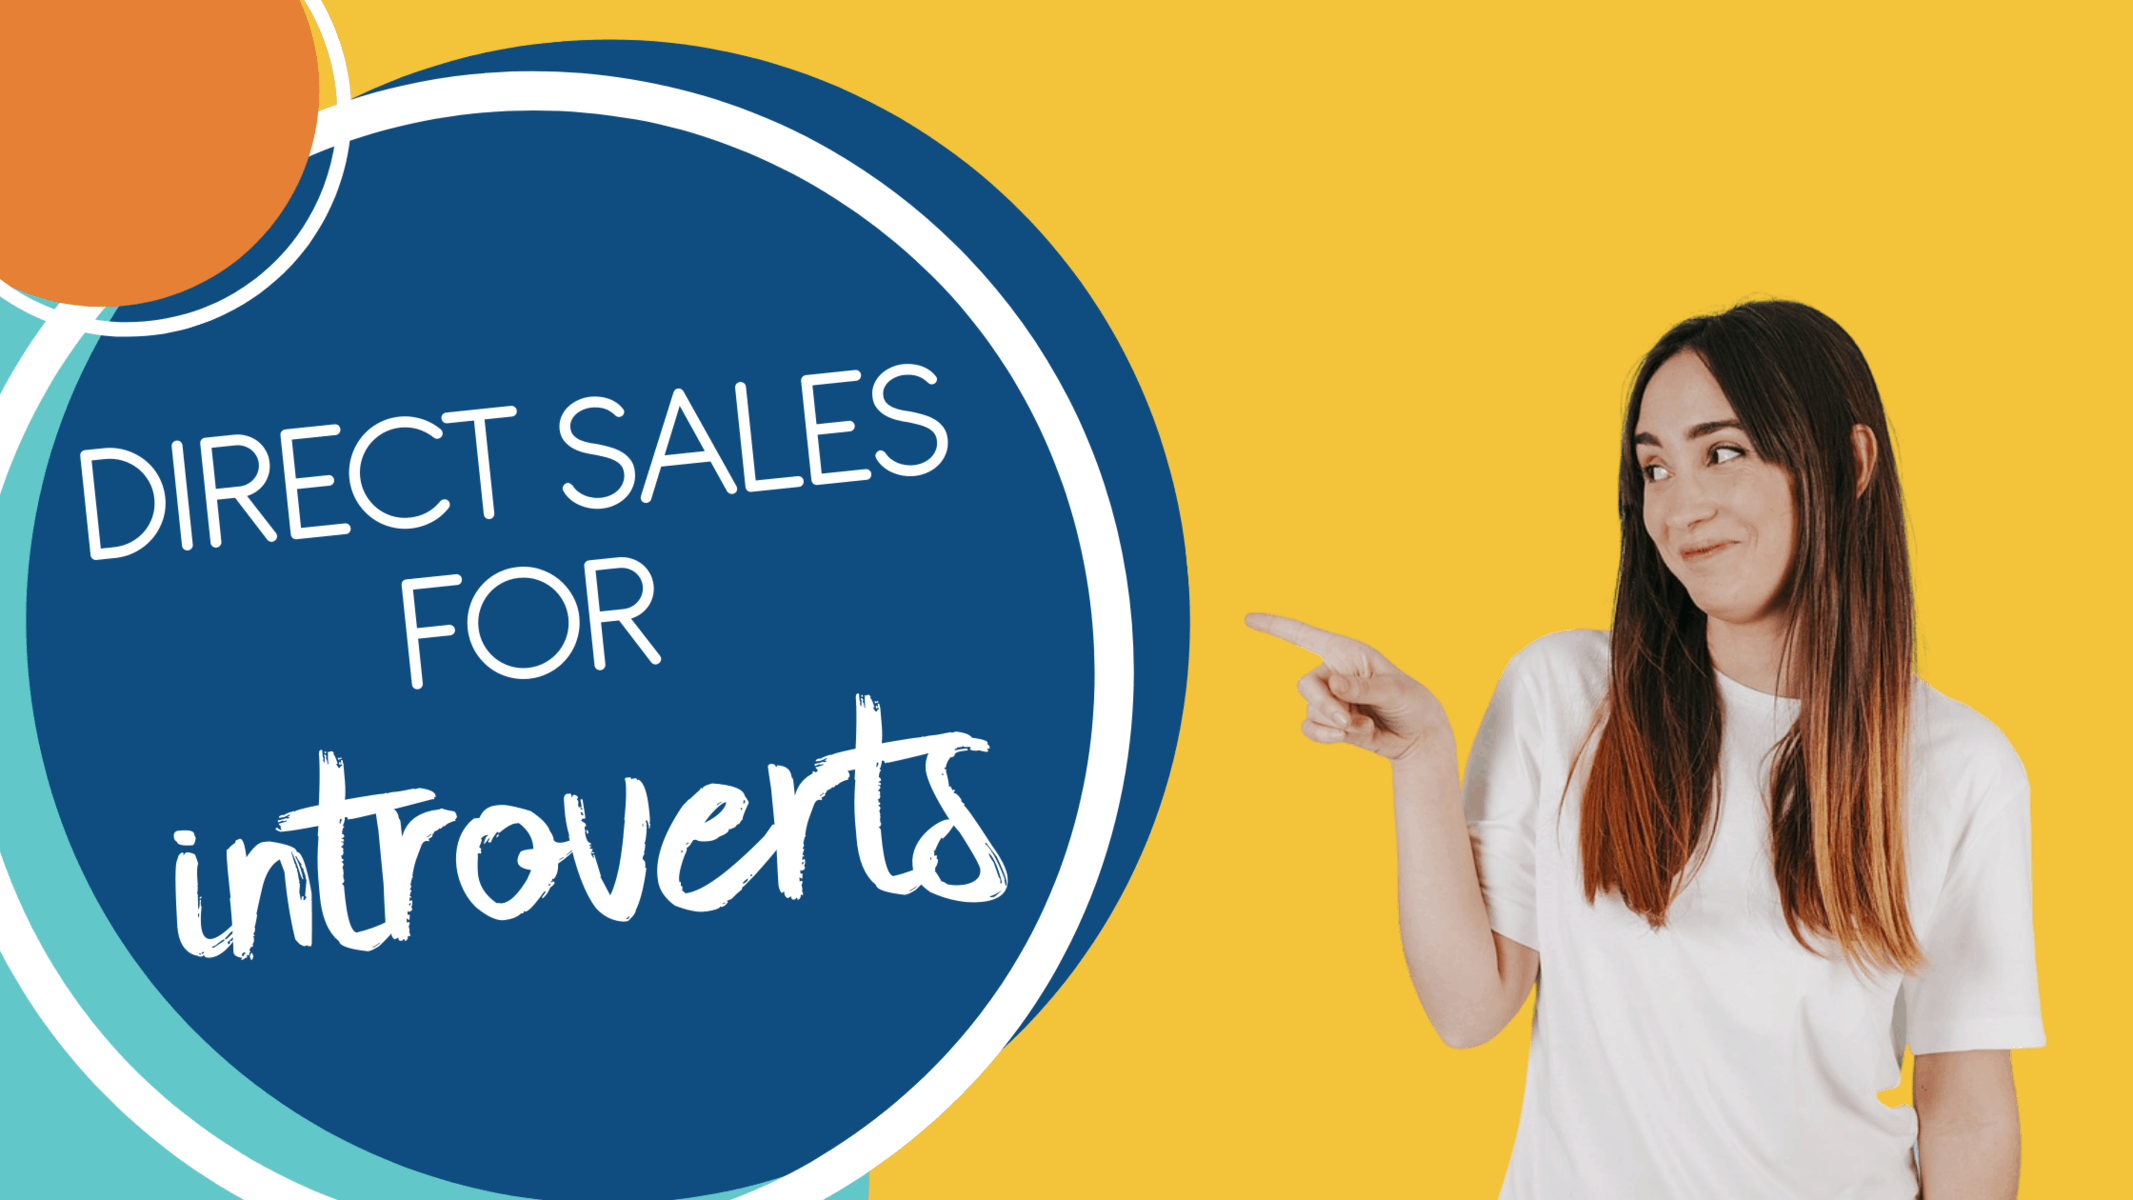 Direct Sales For Introverts